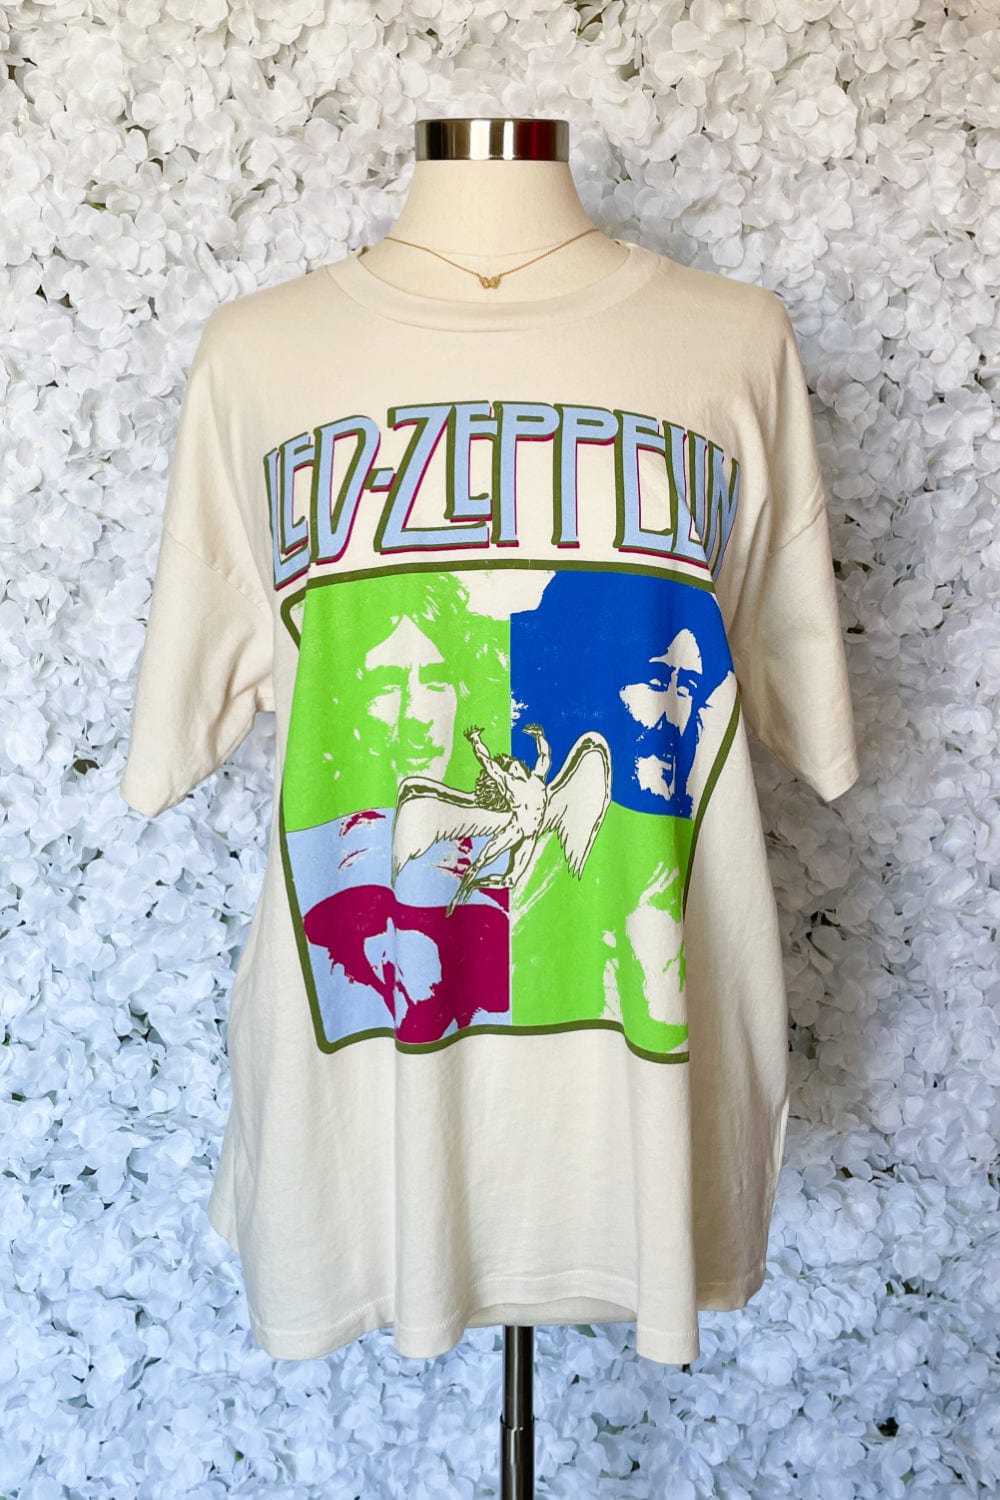 DAYDREAMER Led Zeppelin Four Square Graphic Merch Tee - Shirts & Tops - Blooming Daily